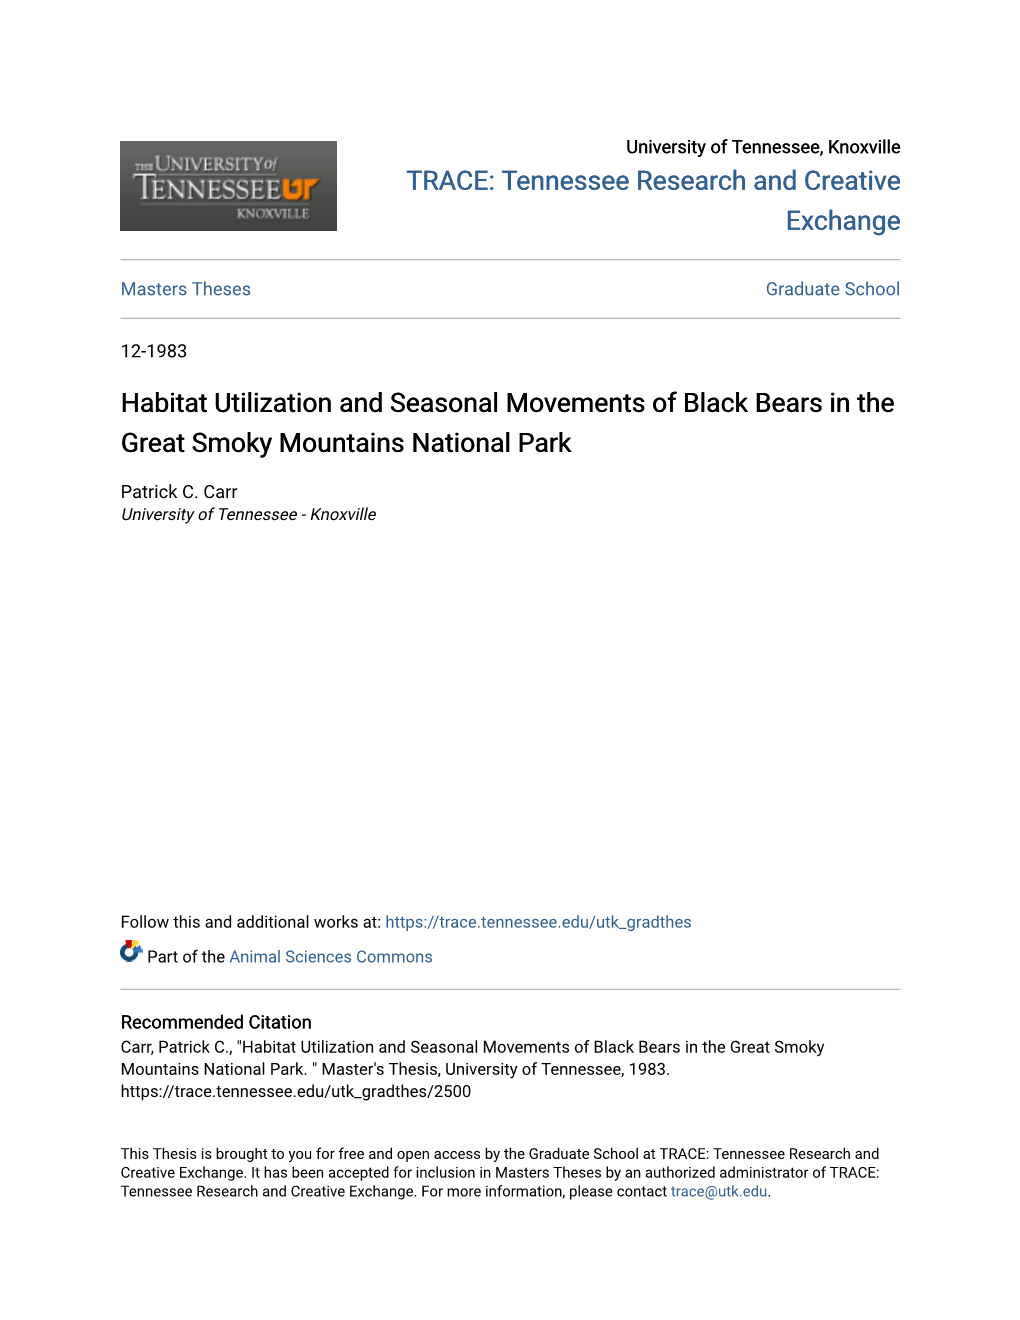 Habitat Utilization and Seasonal Movements of Black Bears in the Great Smoky Mountains National Park